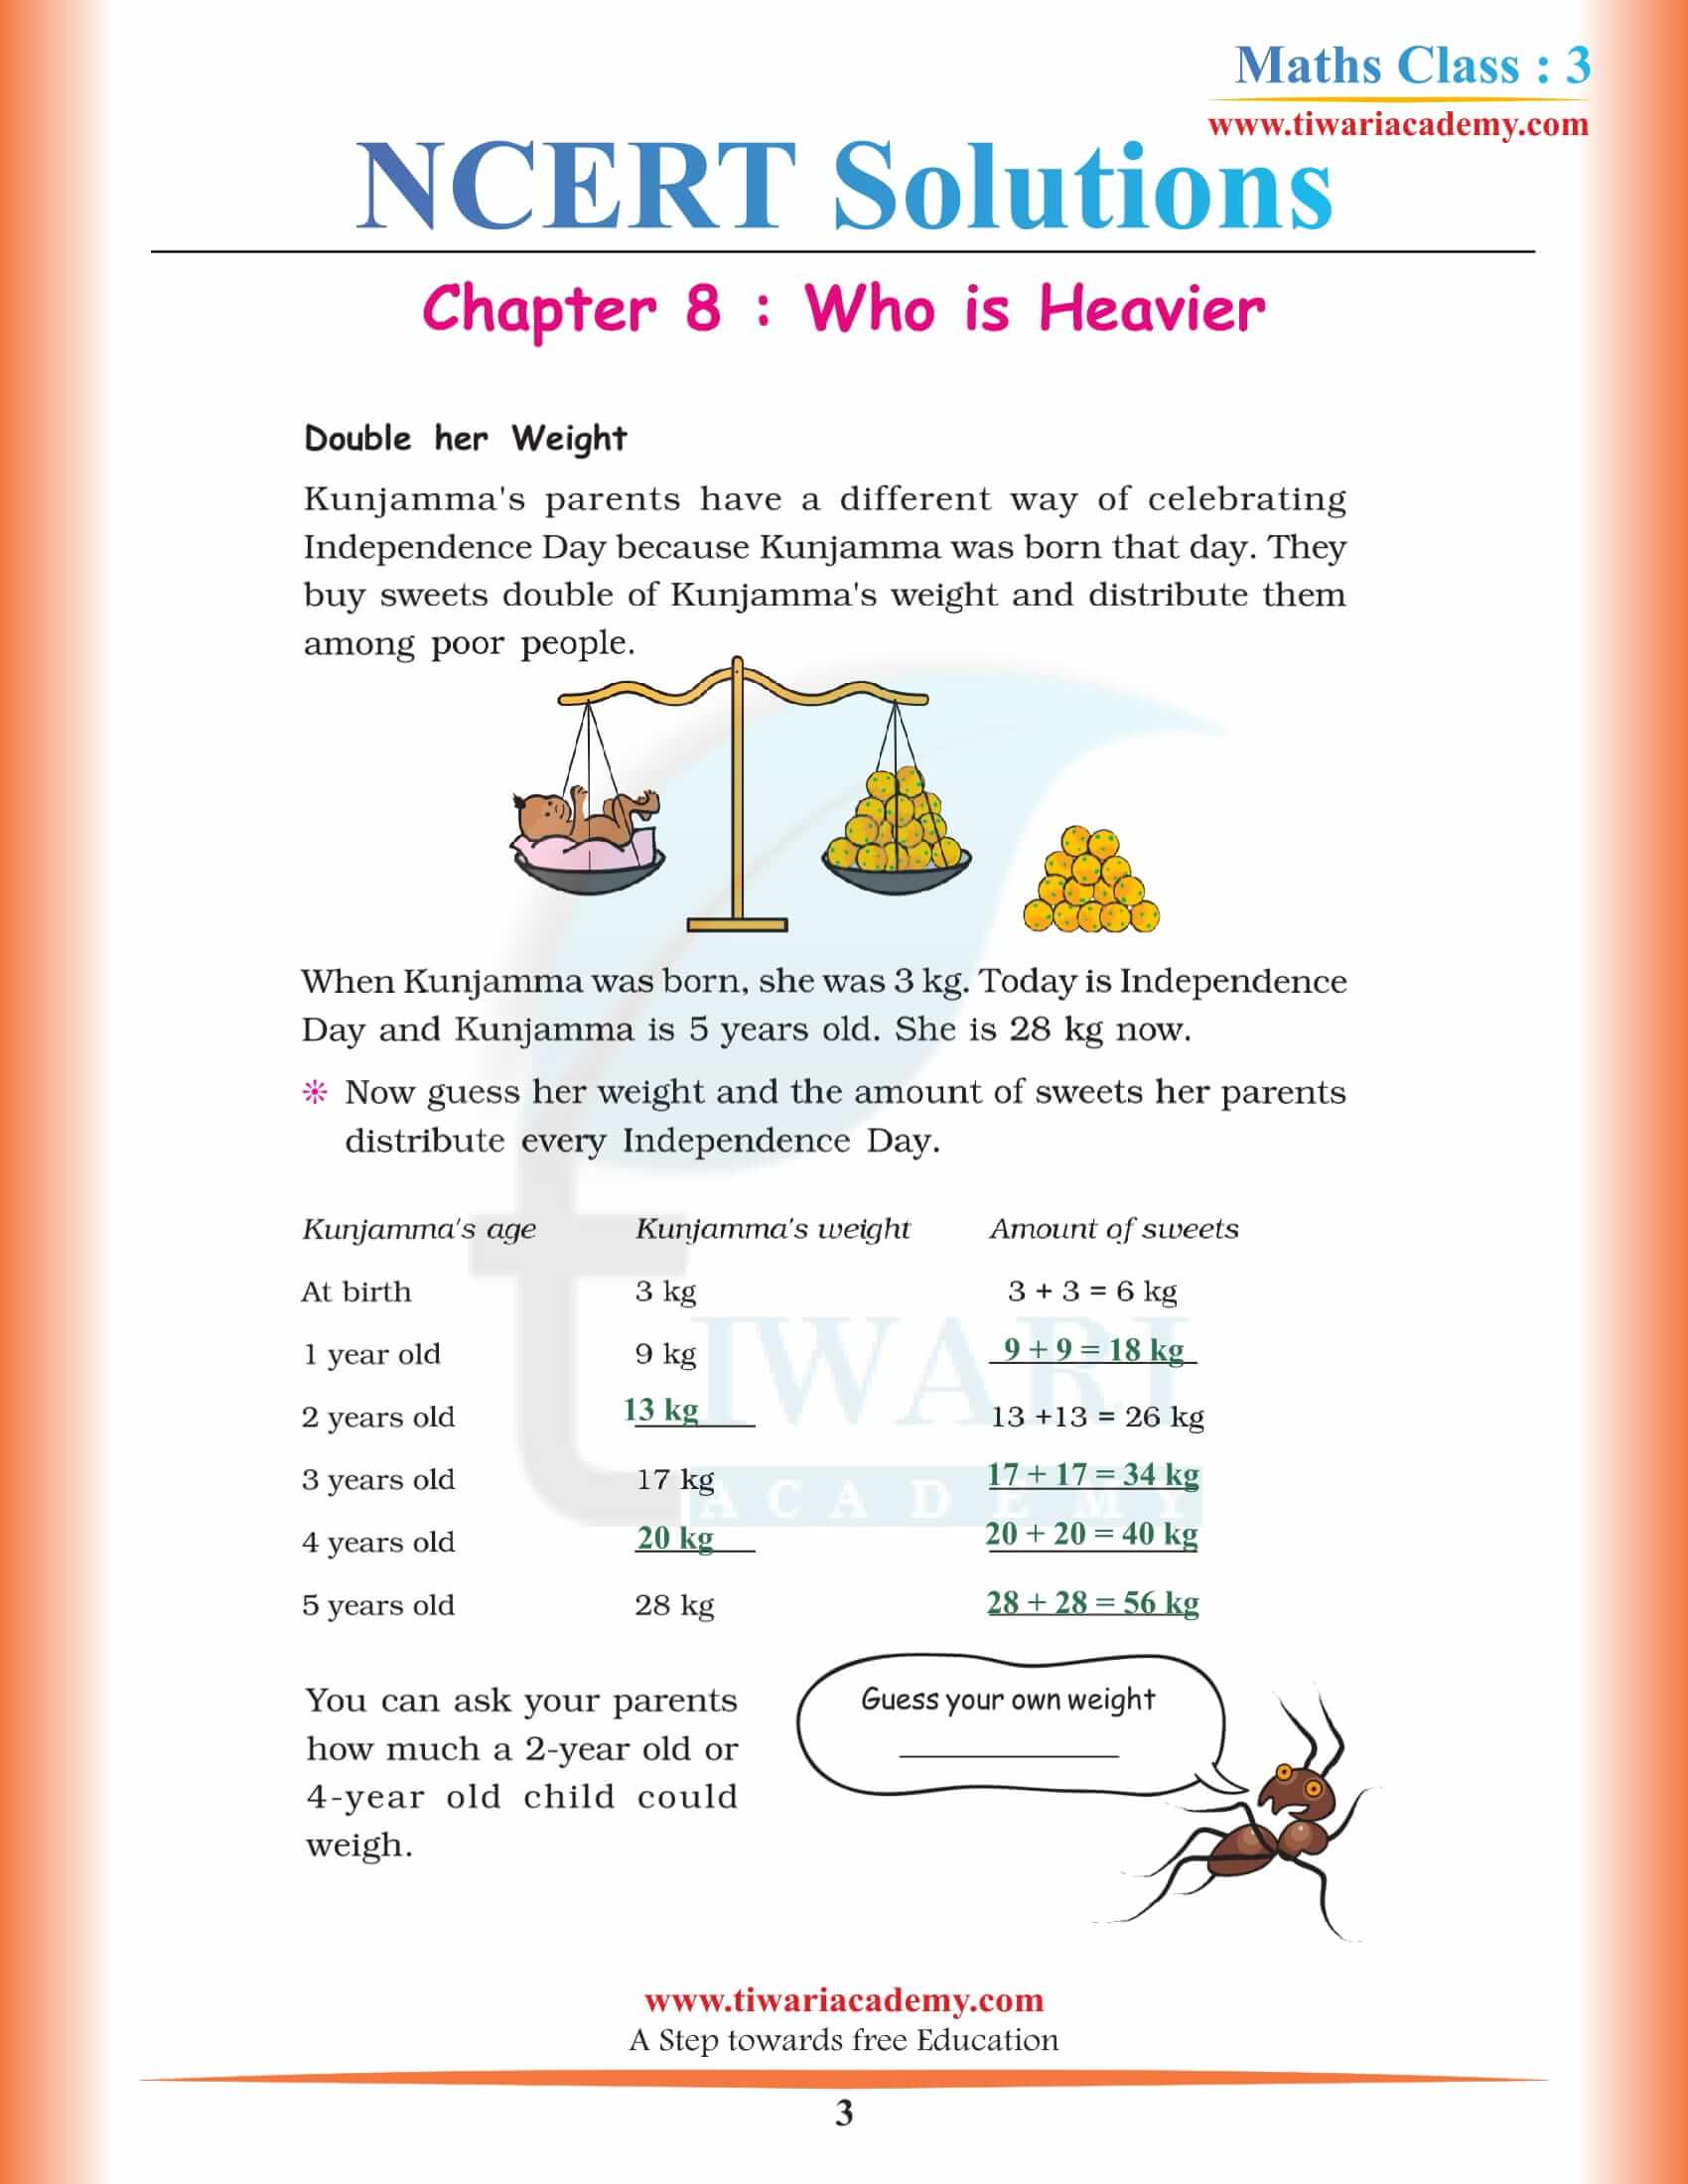 NCERT Solutions for Class 3 Maths Chapter 8 in PDF